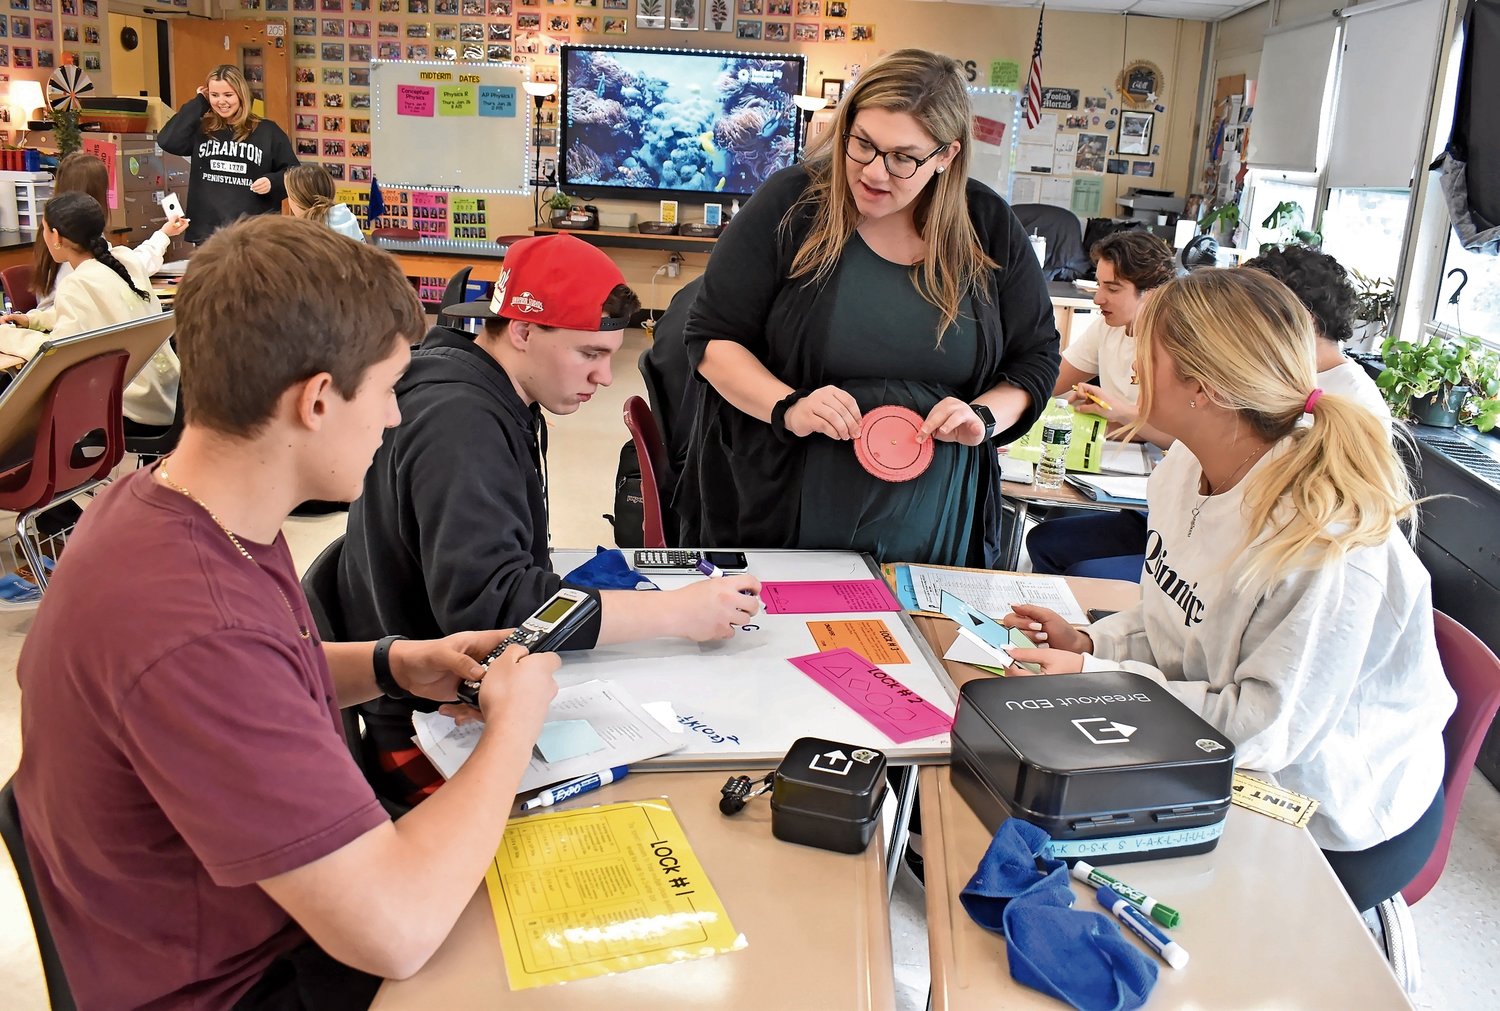 Samantha Gordon worked with students, from left, Louis DeLuca, Jared Laibach and Brianna Grecky, who were using Breakout EDU kits to review material on mechanics and energy for the midterm exam.